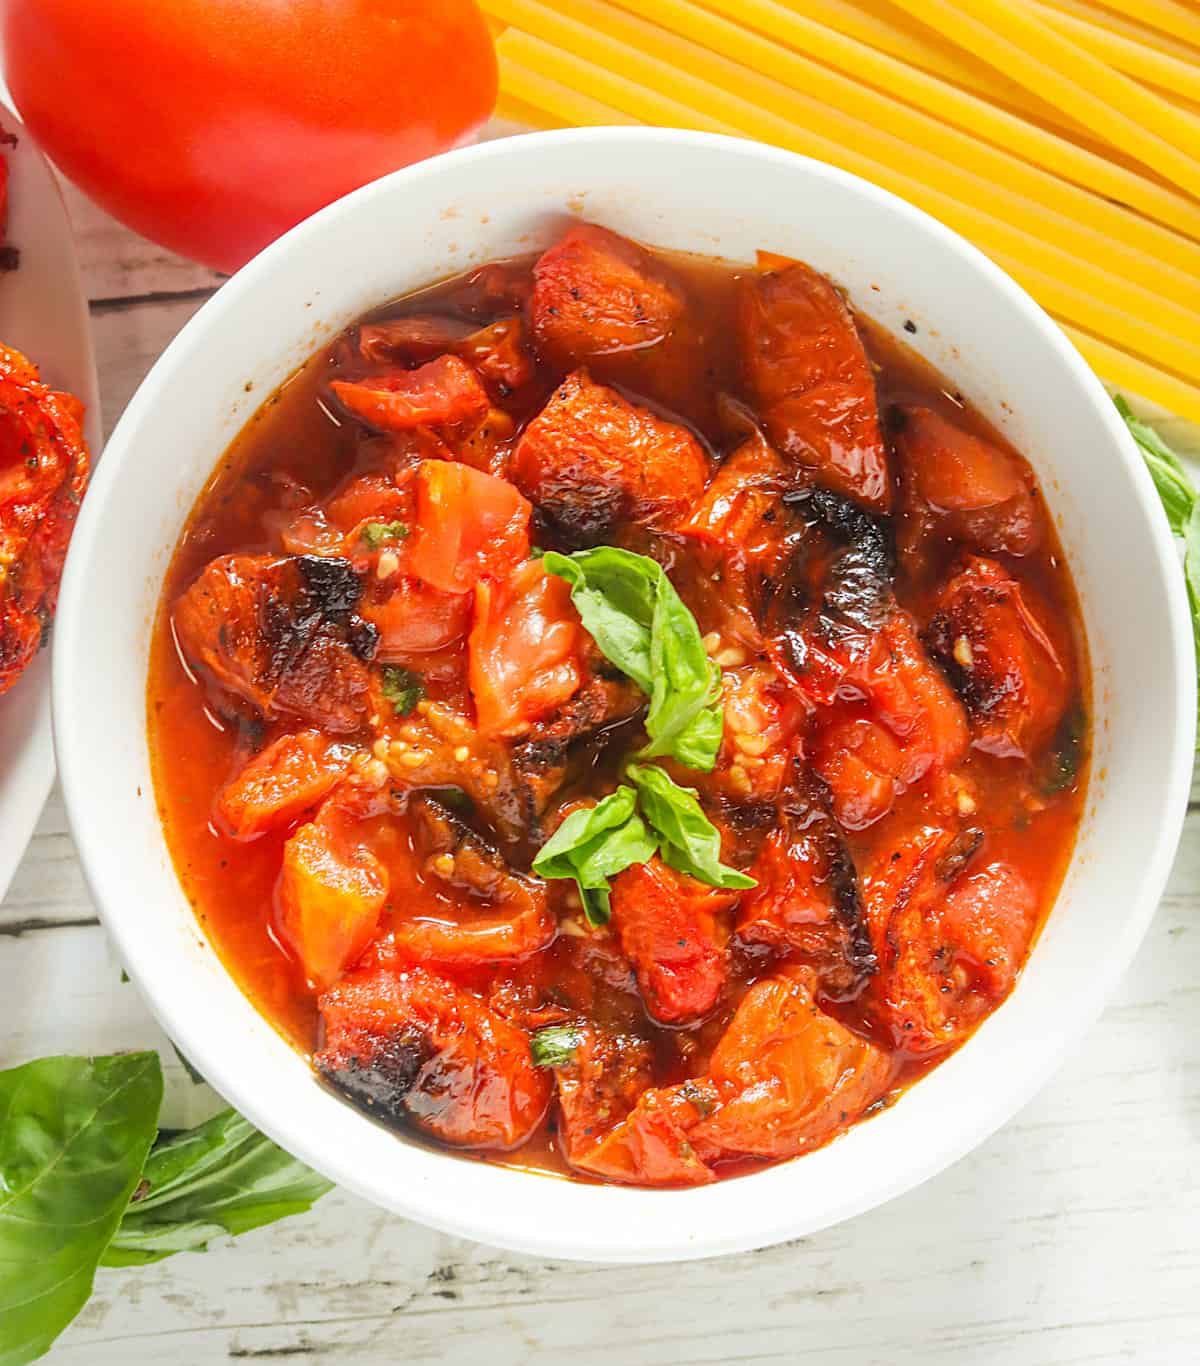 A tasty bowl of fire roasted tomatoes